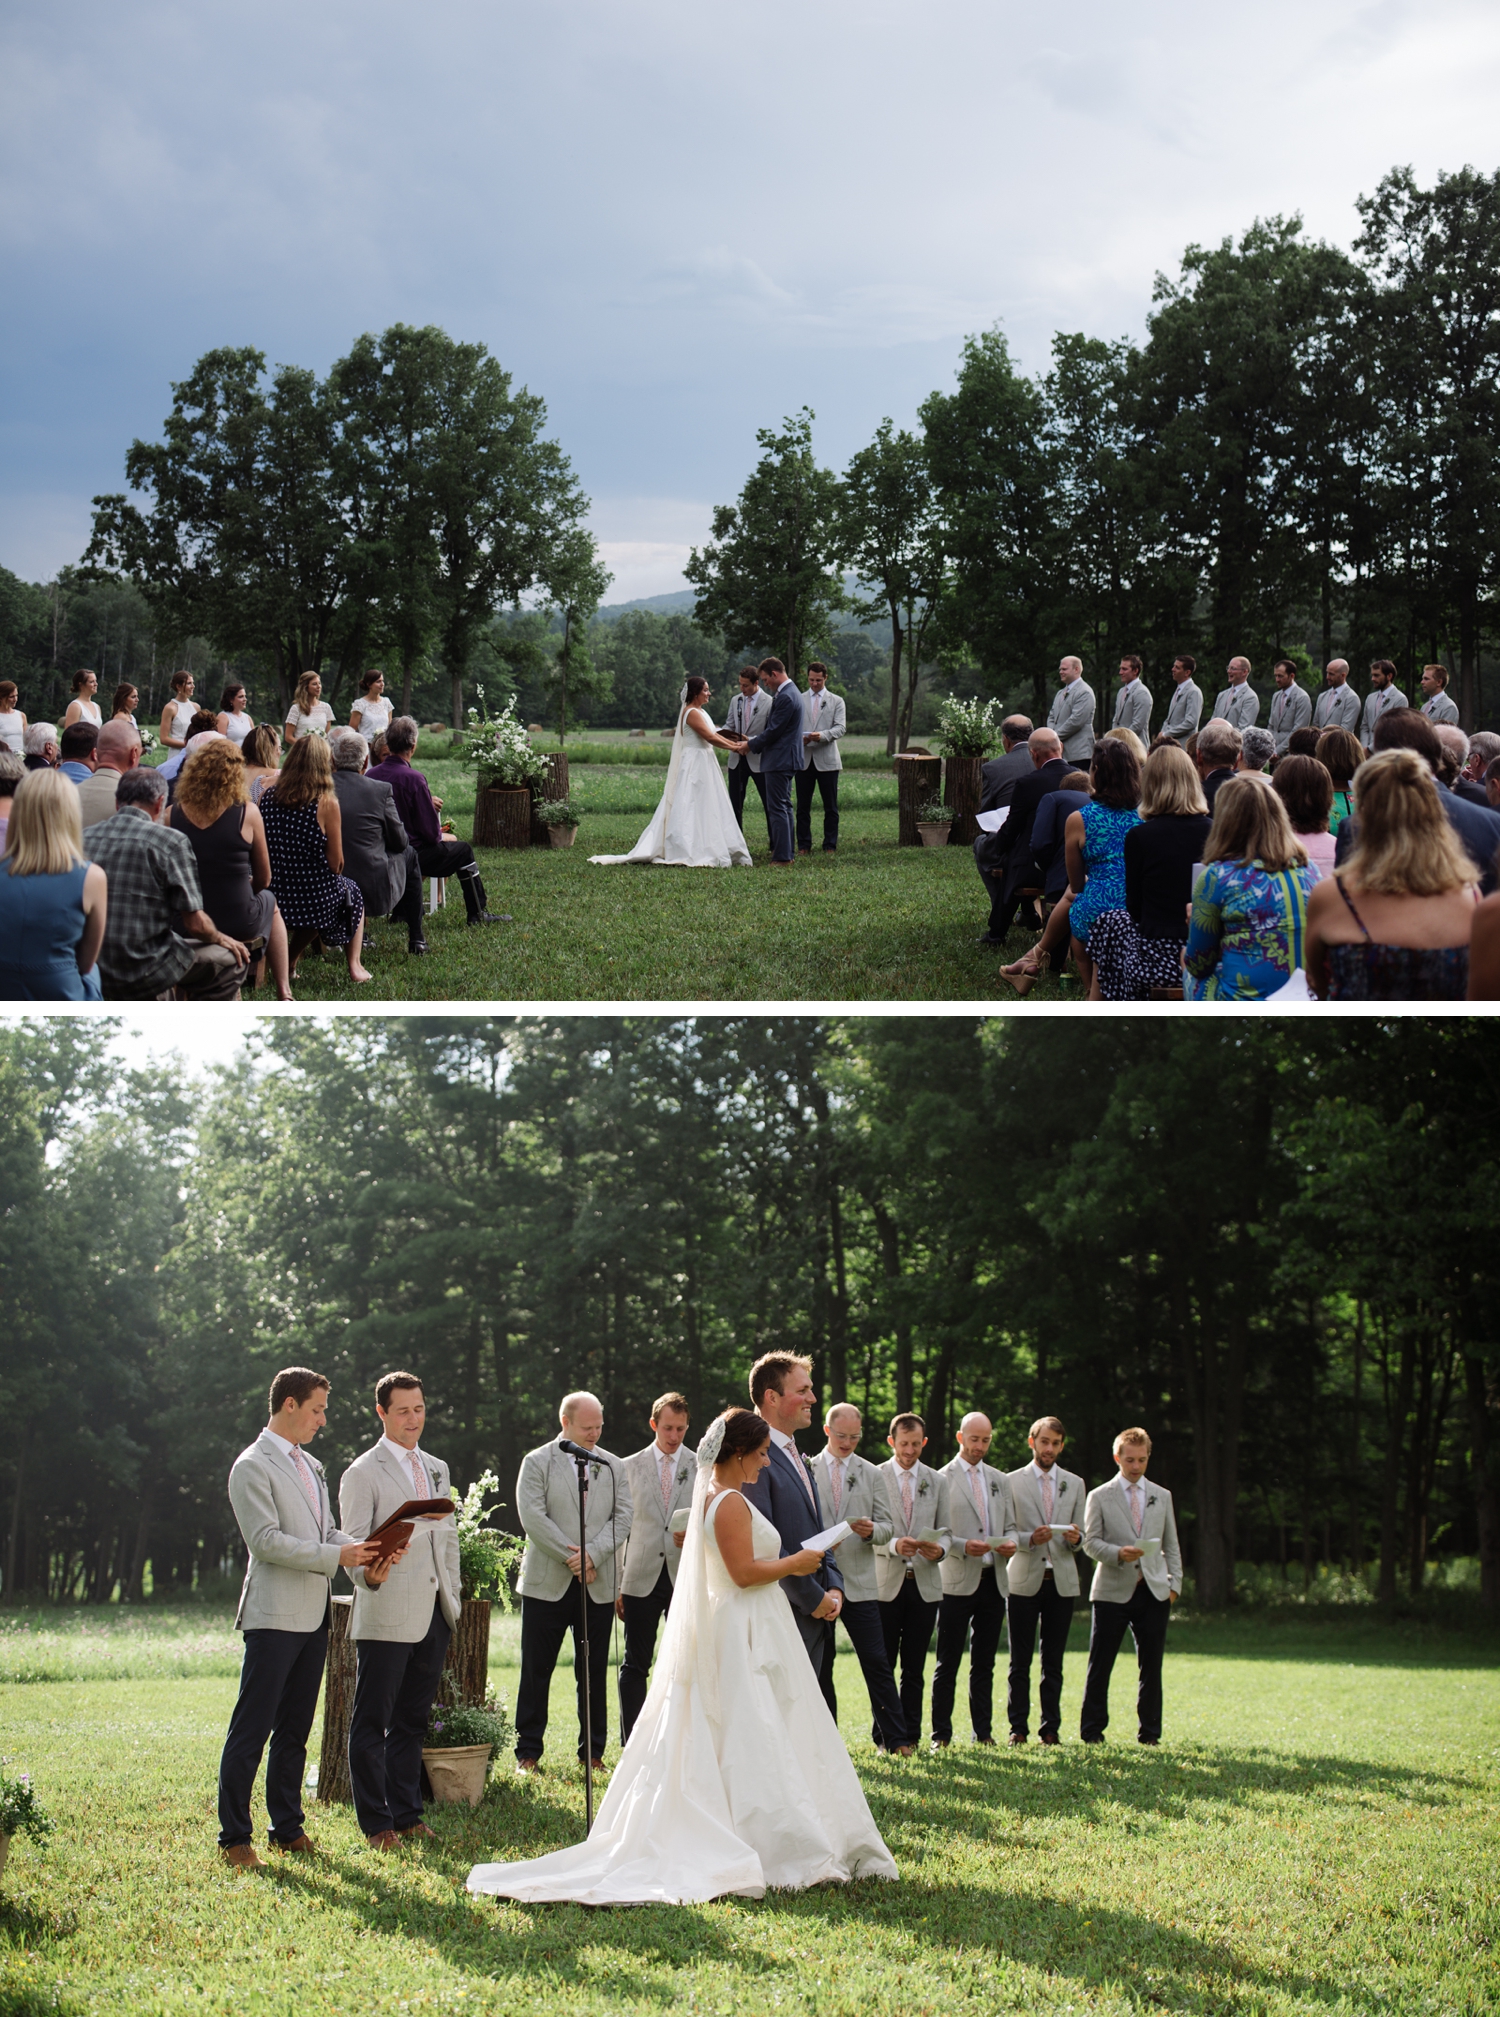 Alpine inspired outdoor wedding at a family home in New Haven, Vermont